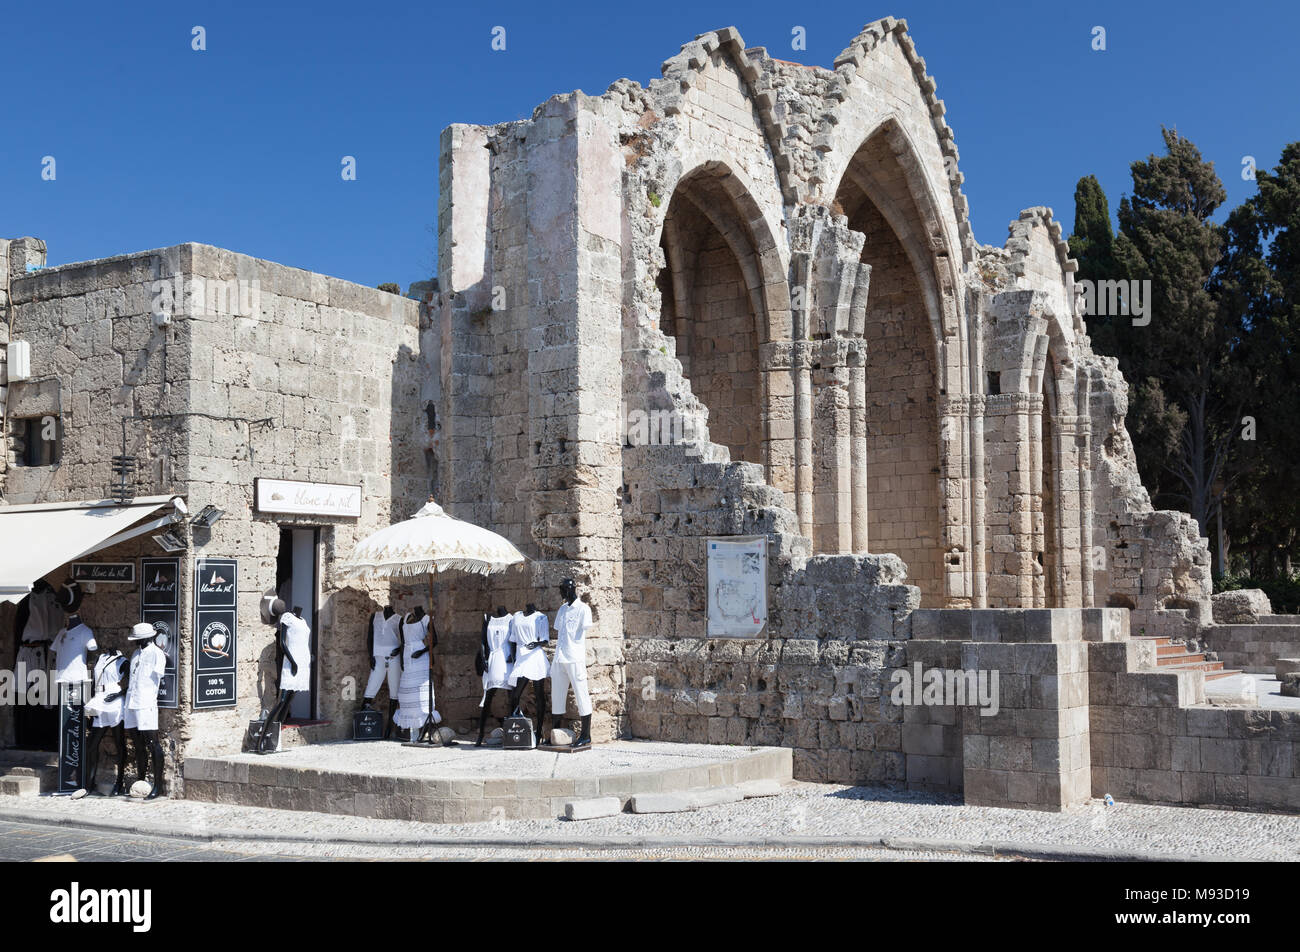 View from the street on Church of the Virgin of the Burgh in the Rhodes Old City, Greece, August 11, 2017 Stock Photo